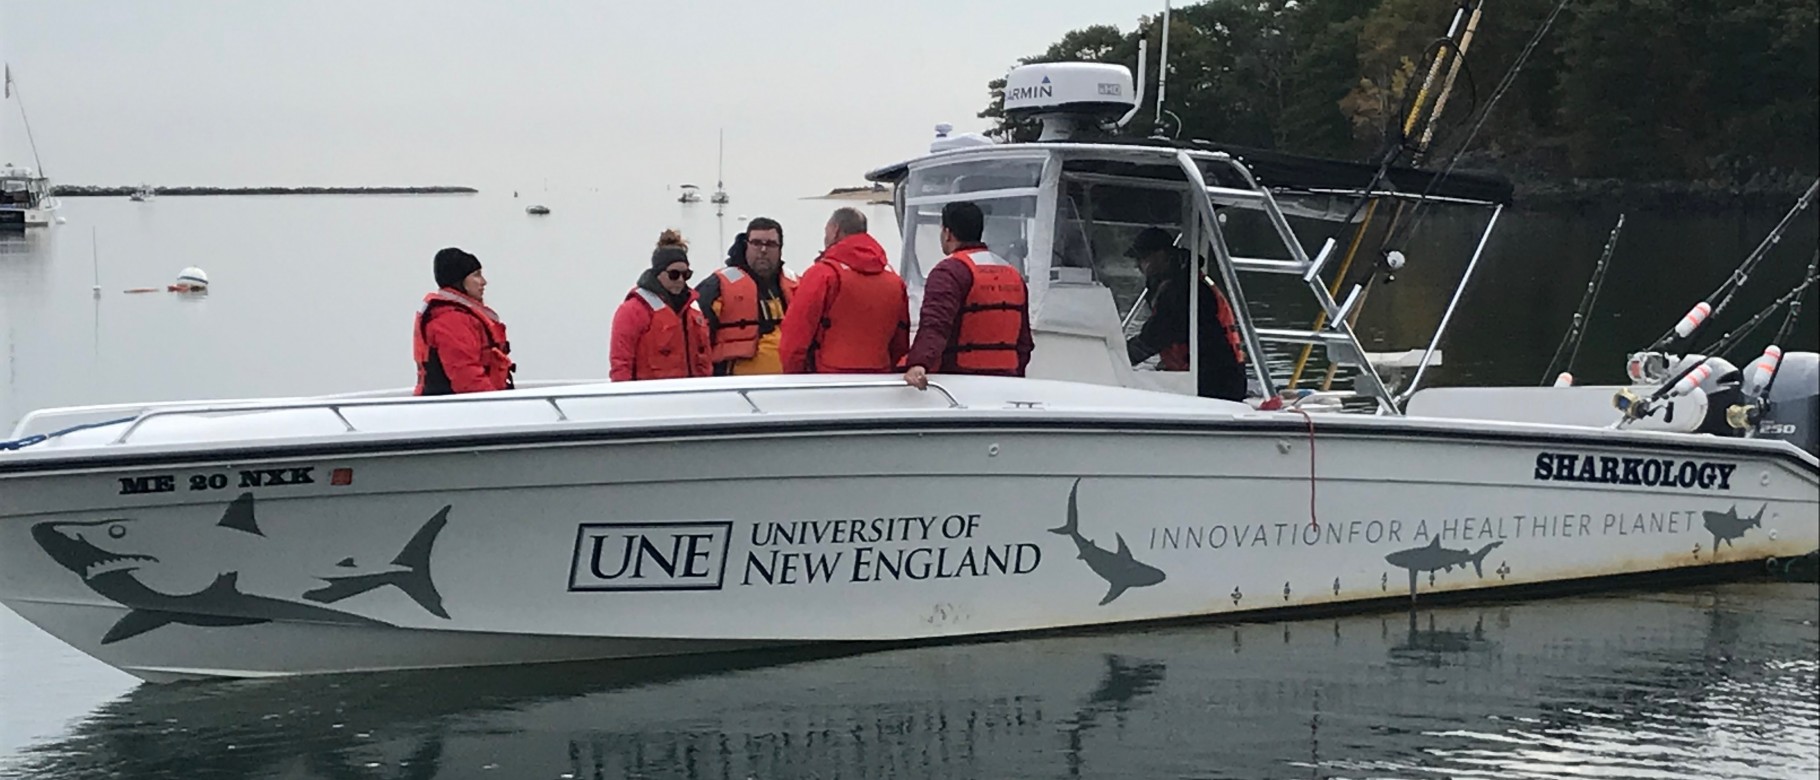 James Sulikowski and two graduate students recently took WCSH along on a shark research trip